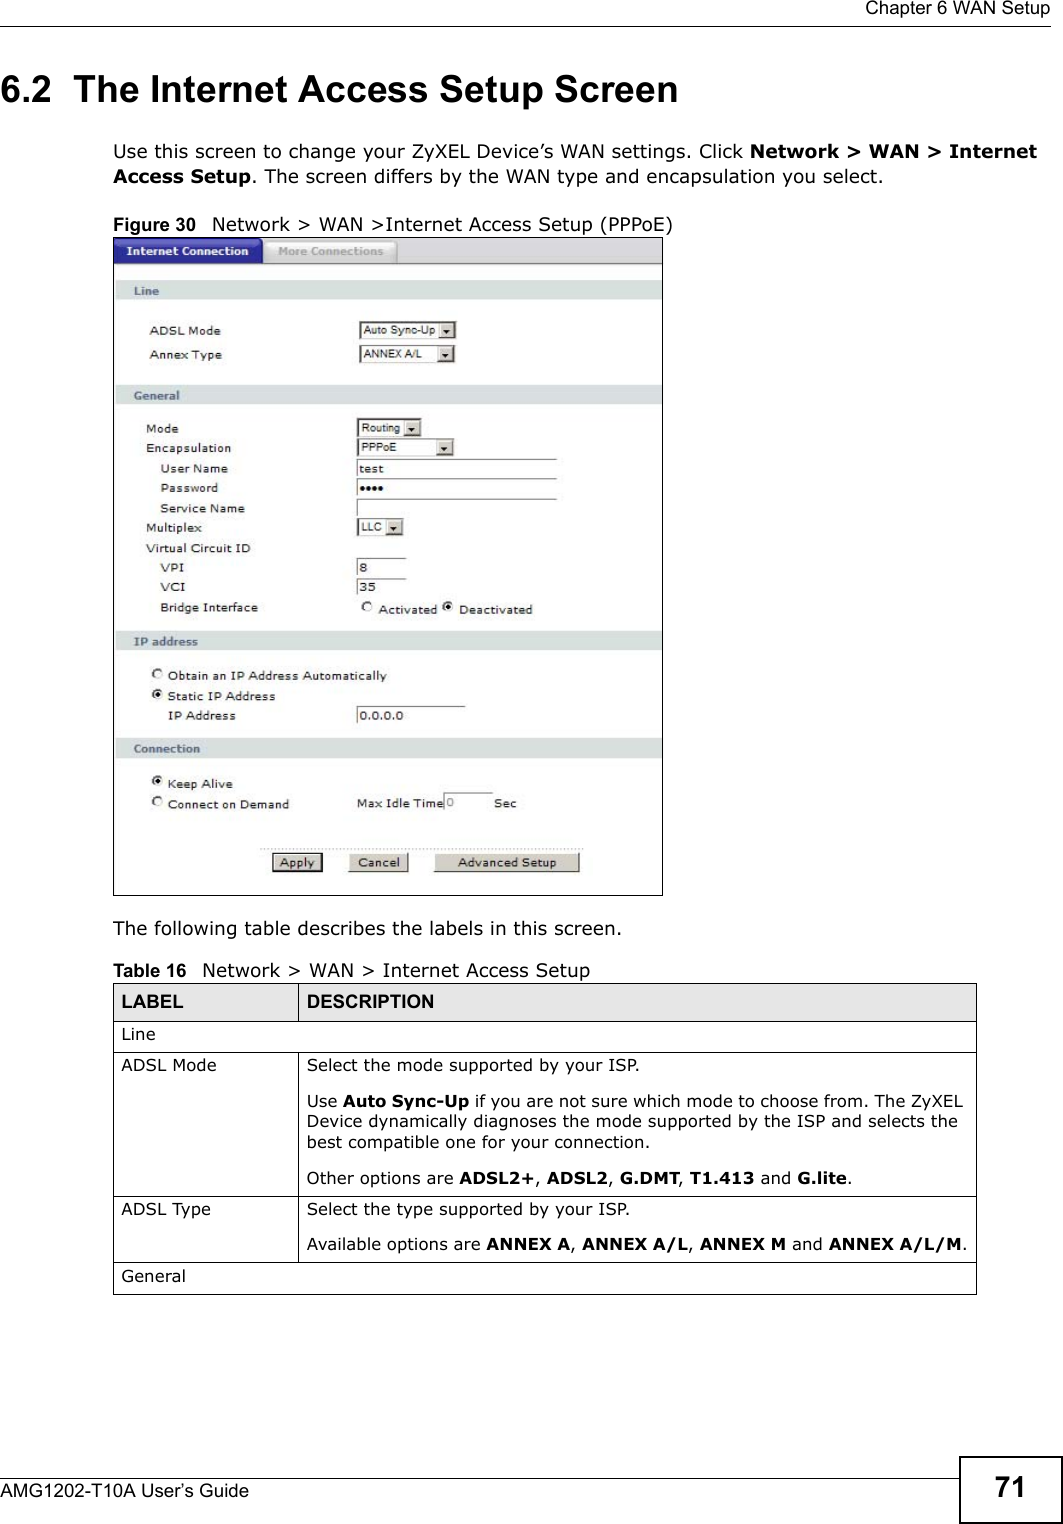  Chapter 6 WAN SetupAMG1202-T10A User’s Guide 716.2  The Internet Access Setup ScreenUse this screen to change your ZyXEL Device’s WAN settings. Click Network &gt; WAN &gt; Internet Access Setup. The screen differs by the WAN type and encapsulation you select.Figure 30   Network &gt; WAN &gt;Internet Access Setup (PPPoE)The following table describes the labels in this screen.  Table 16   Network &gt; WAN &gt; Internet Access SetupLABEL DESCRIPTIONLineADSL Mode Select the mode supported by your ISP.Use Auto Sync-Up if you are not sure which mode to choose from. The ZyXEL Device dynamically diagnoses the mode supported by the ISP and selects the best compatible one for your connection.Other options are ADSL2+, ADSL2, G.DMT, T1.413 and G.lite.ADSL Type Select the type supported by your ISP.Available options are ANNEX A, ANNEX A/L, ANNEX M and ANNEX A/L/M.General